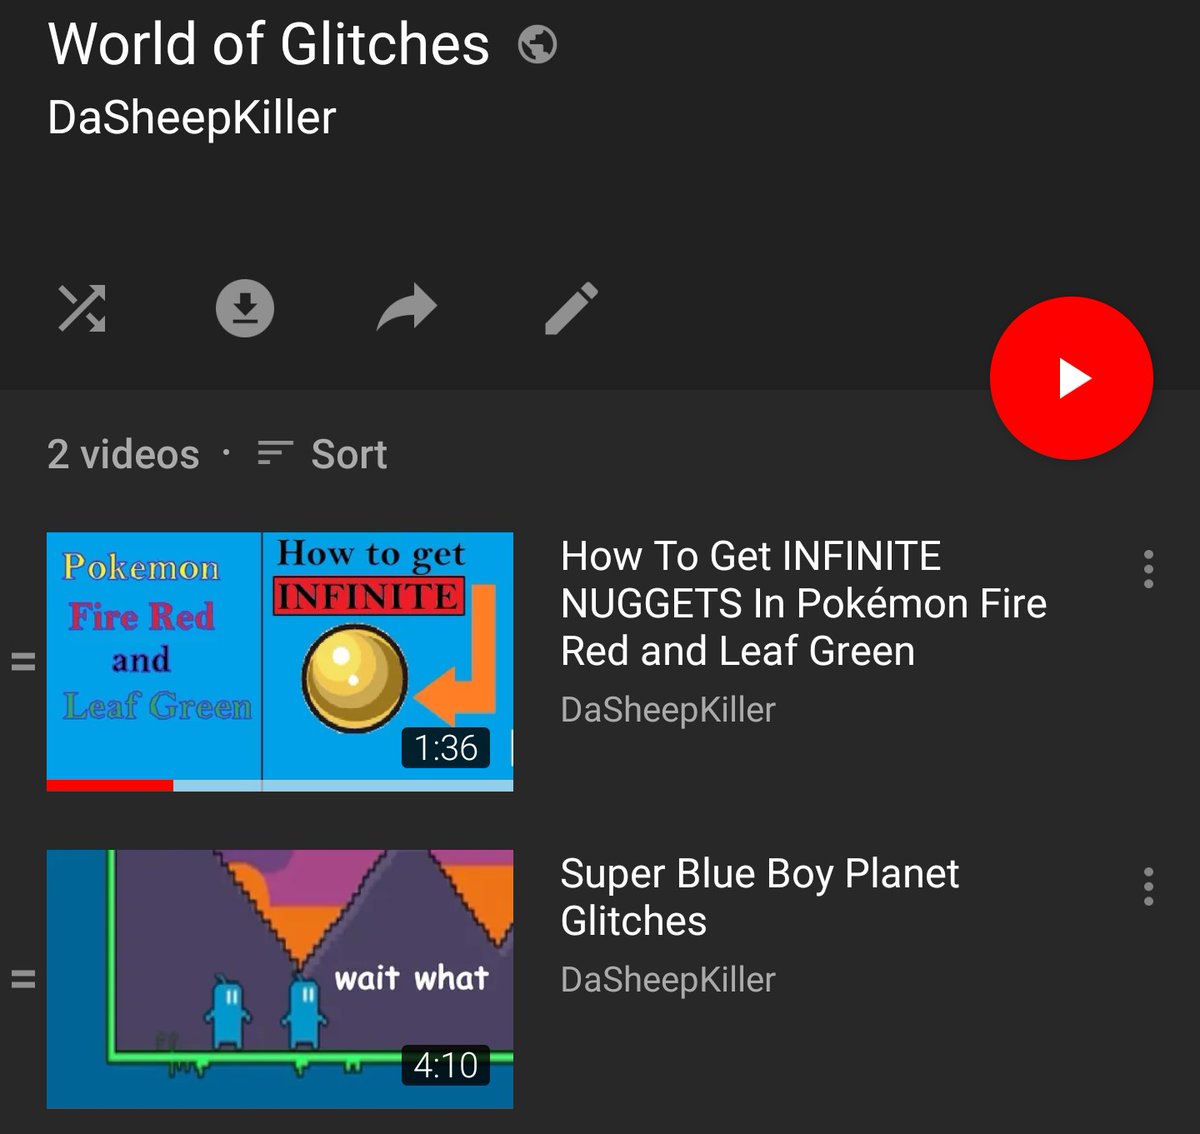 World of Glitches:A series that I've only done a few episodes on now, but it's basically where I explore glitches or exploits in games. So far I've done the infinite nuggets exploit in Fire Red & Leaf Green (that video was VERY successful, btw) and speedrunning tricks in SBBP.